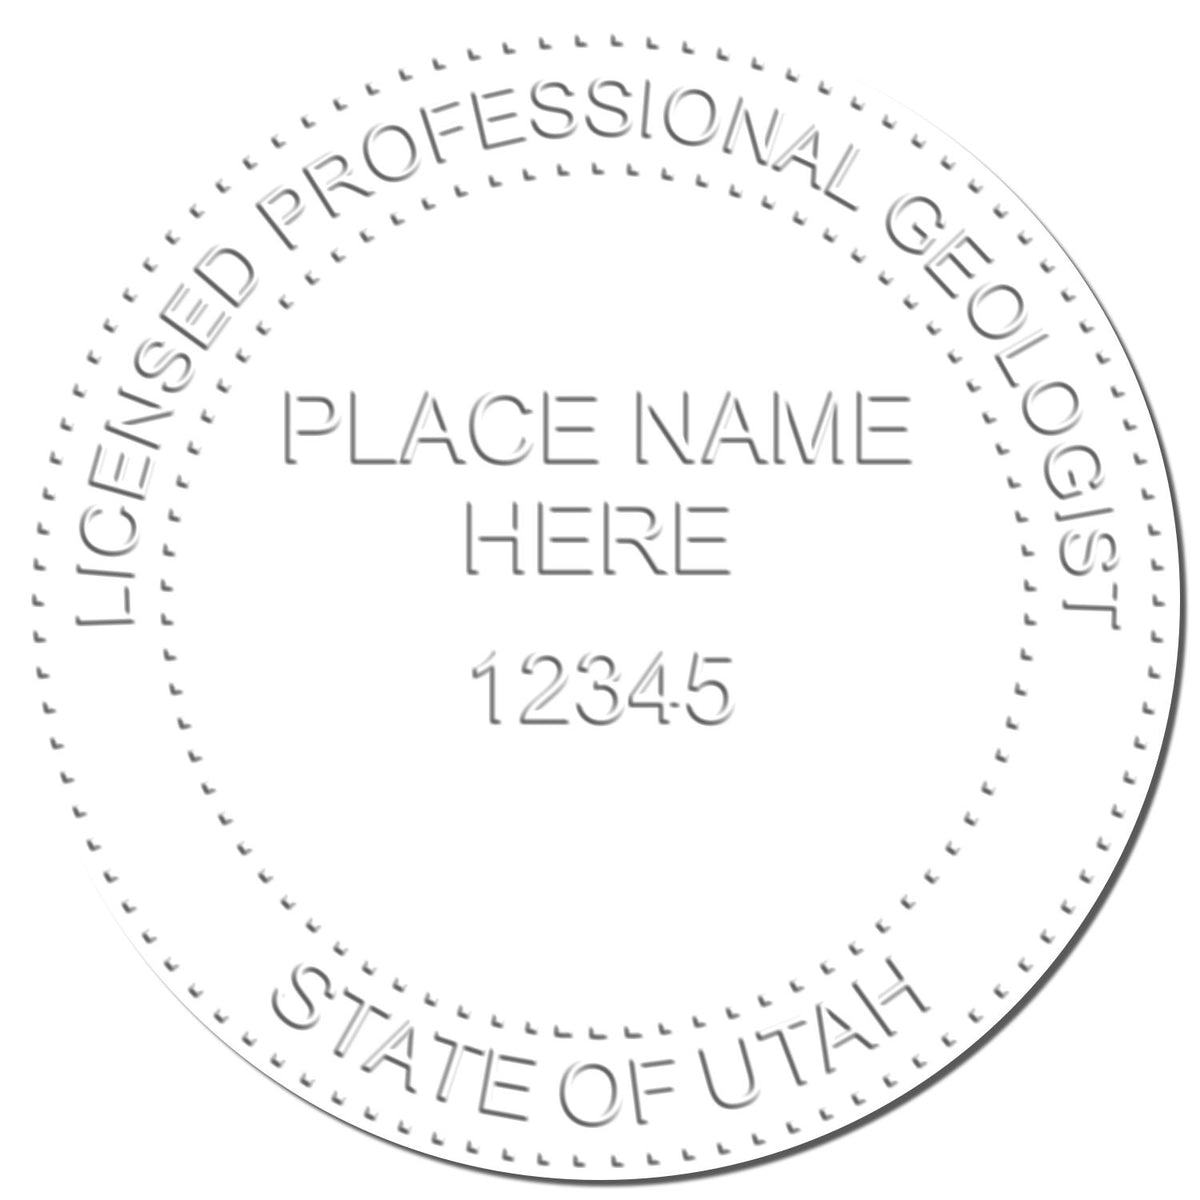 A photograph of the State of Utah Extended Long Reach Geologist Seal stamp impression reveals a vivid, professional image of the on paper.